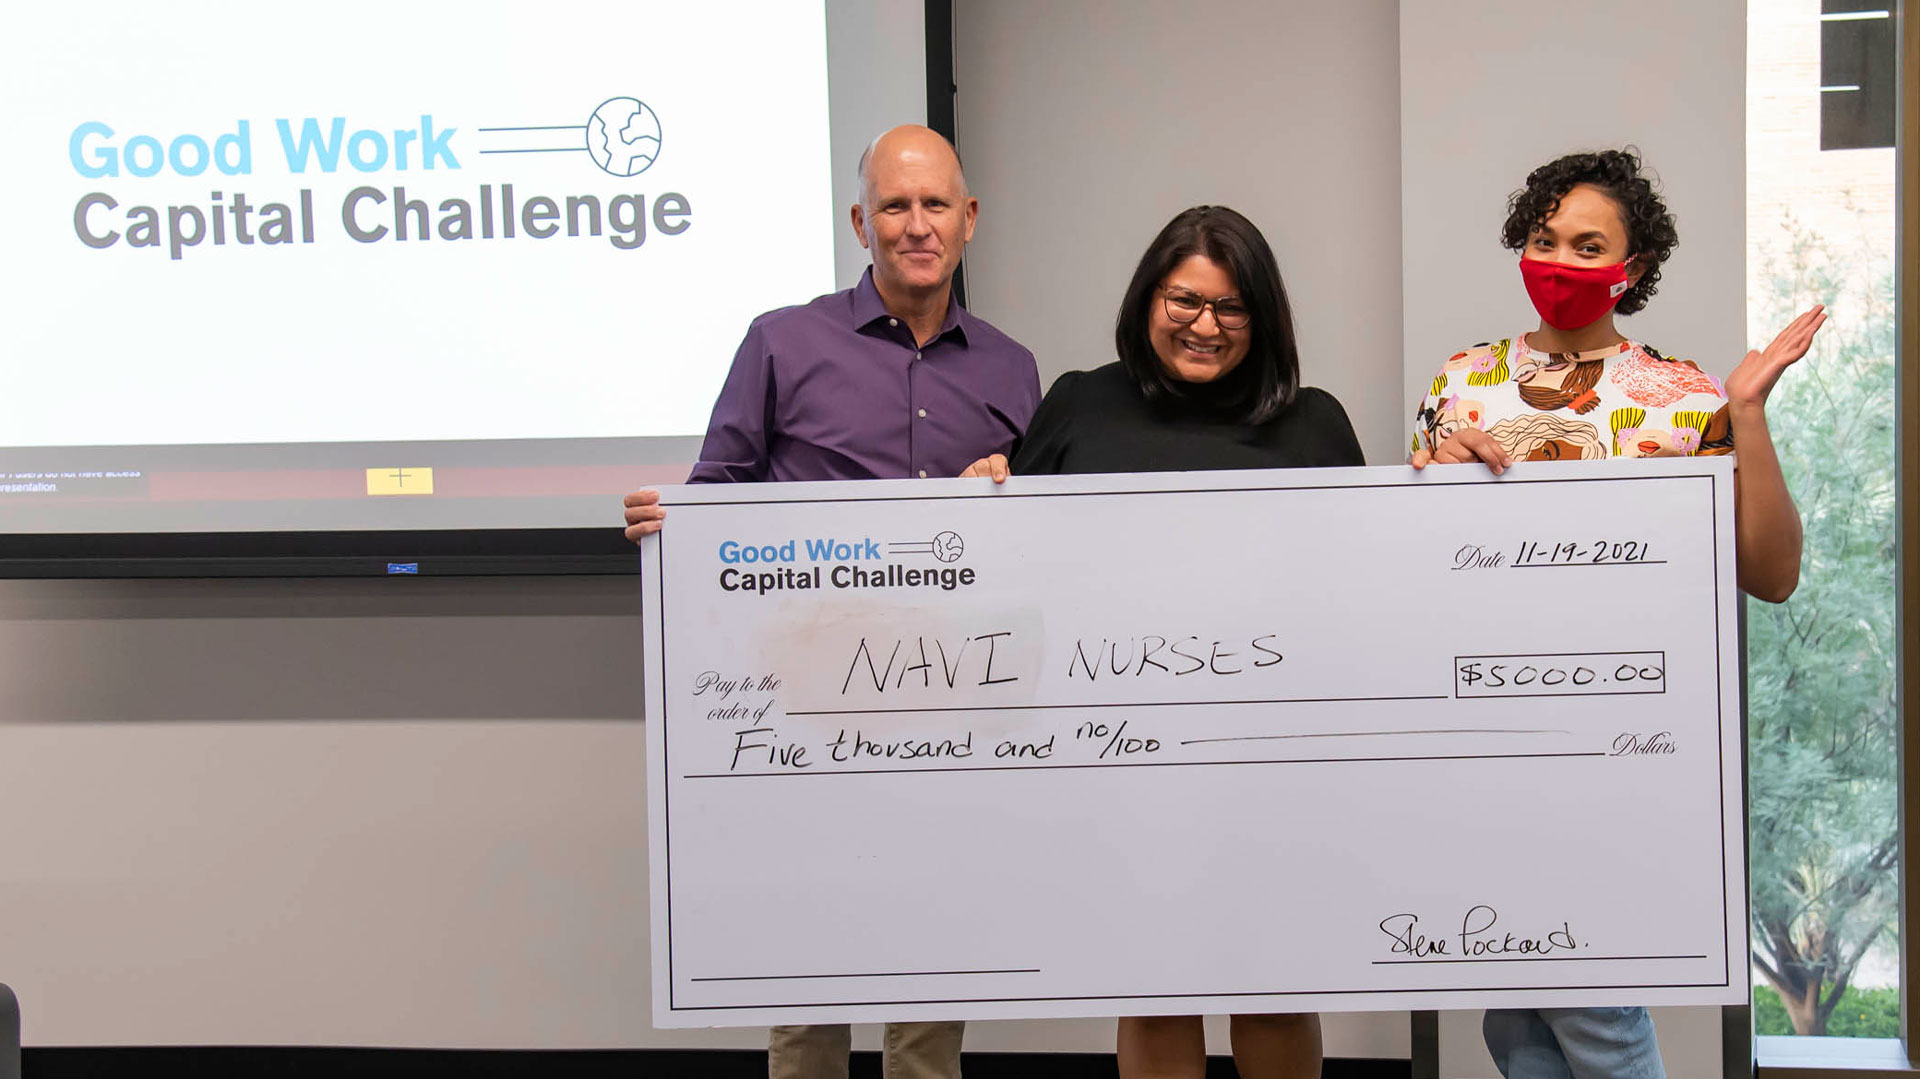 Steve Lockhard presents a $5,000 check to Jasmine Bhatti and her business partner Ayan Said from the Good Work Capital Challenge.